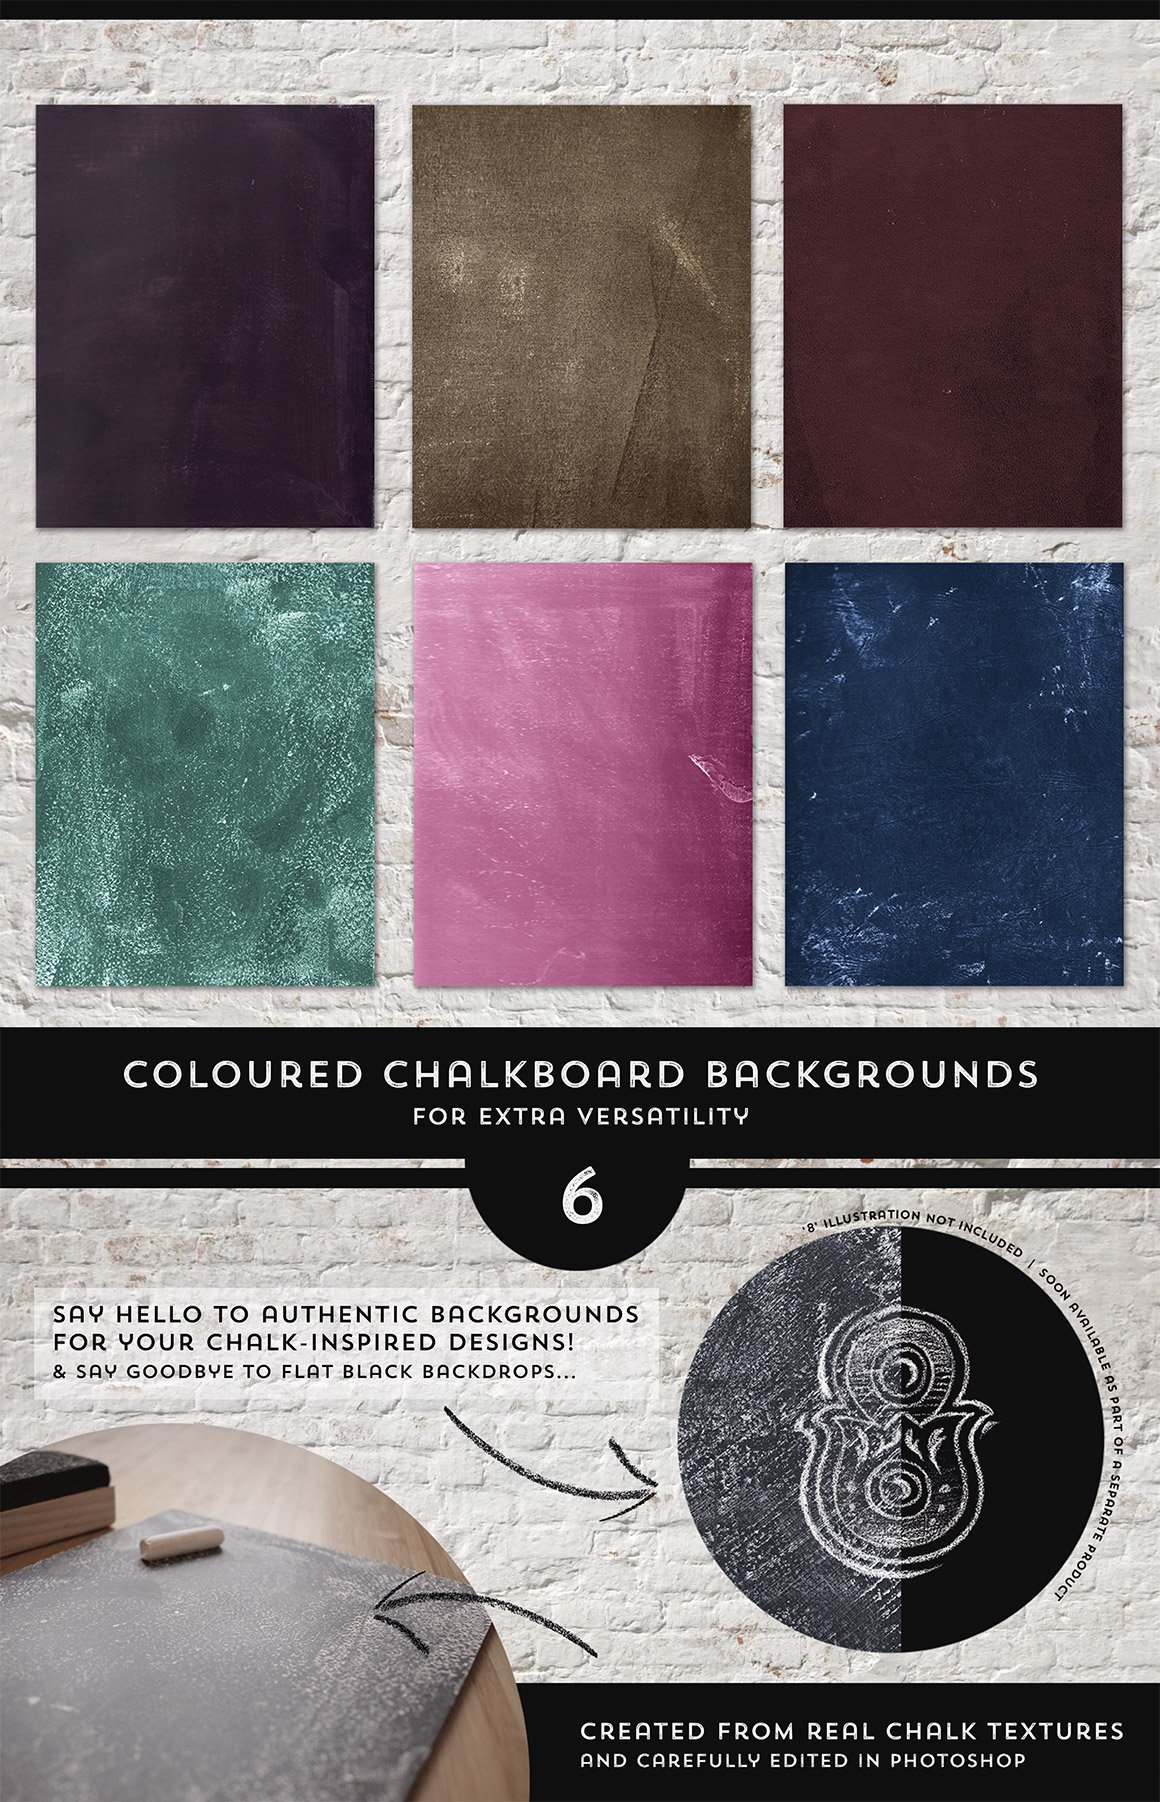 16 Authentic Chalkboard Textures - Vol Two